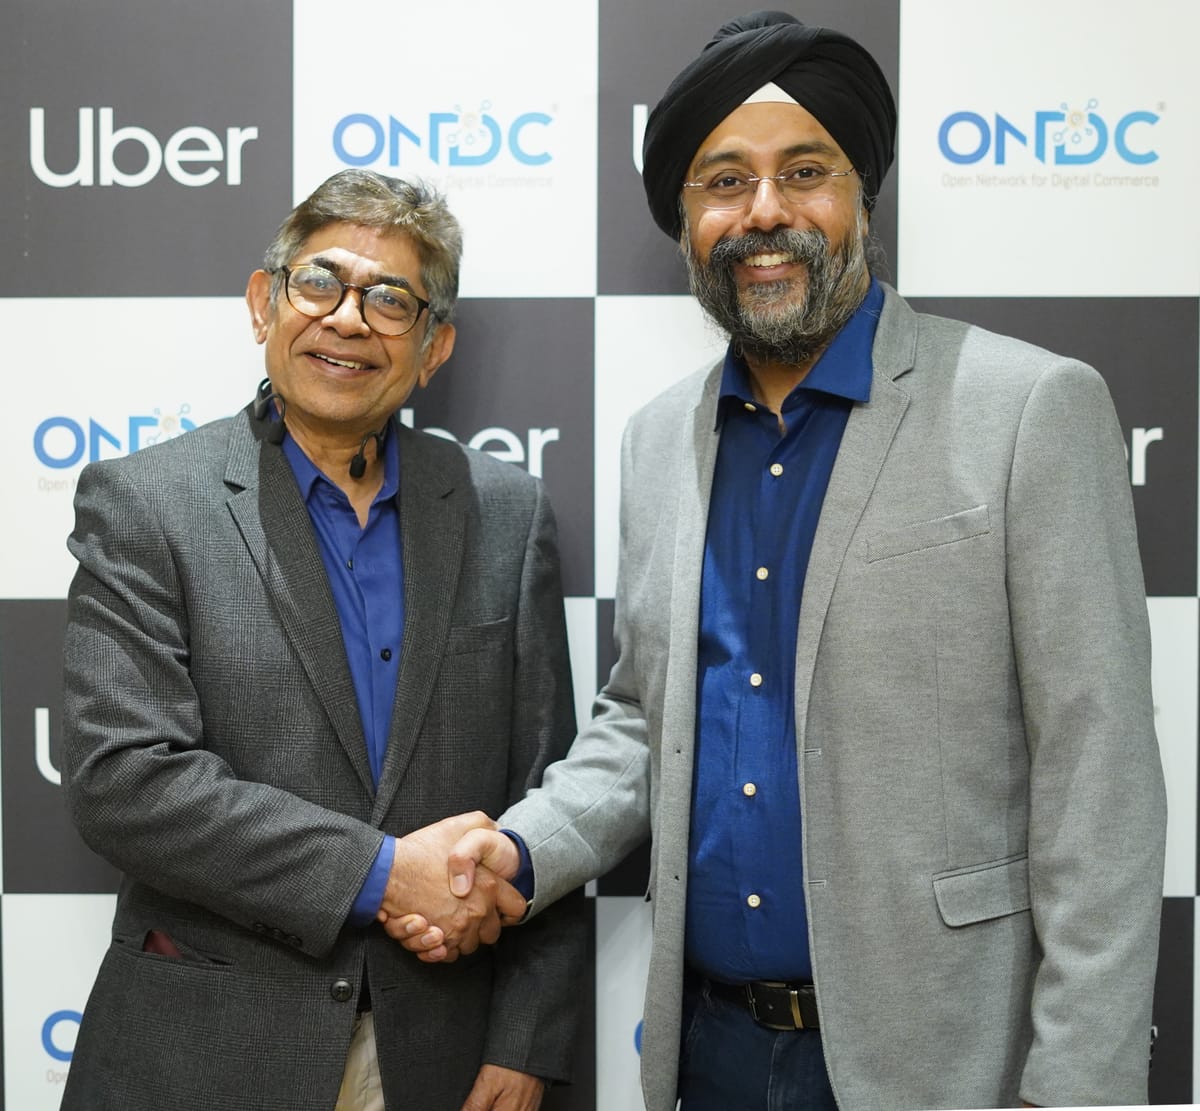 Uber CEO says India’s Digital Public Infrastructure holds incredible promise as company signs MoU with ONDC